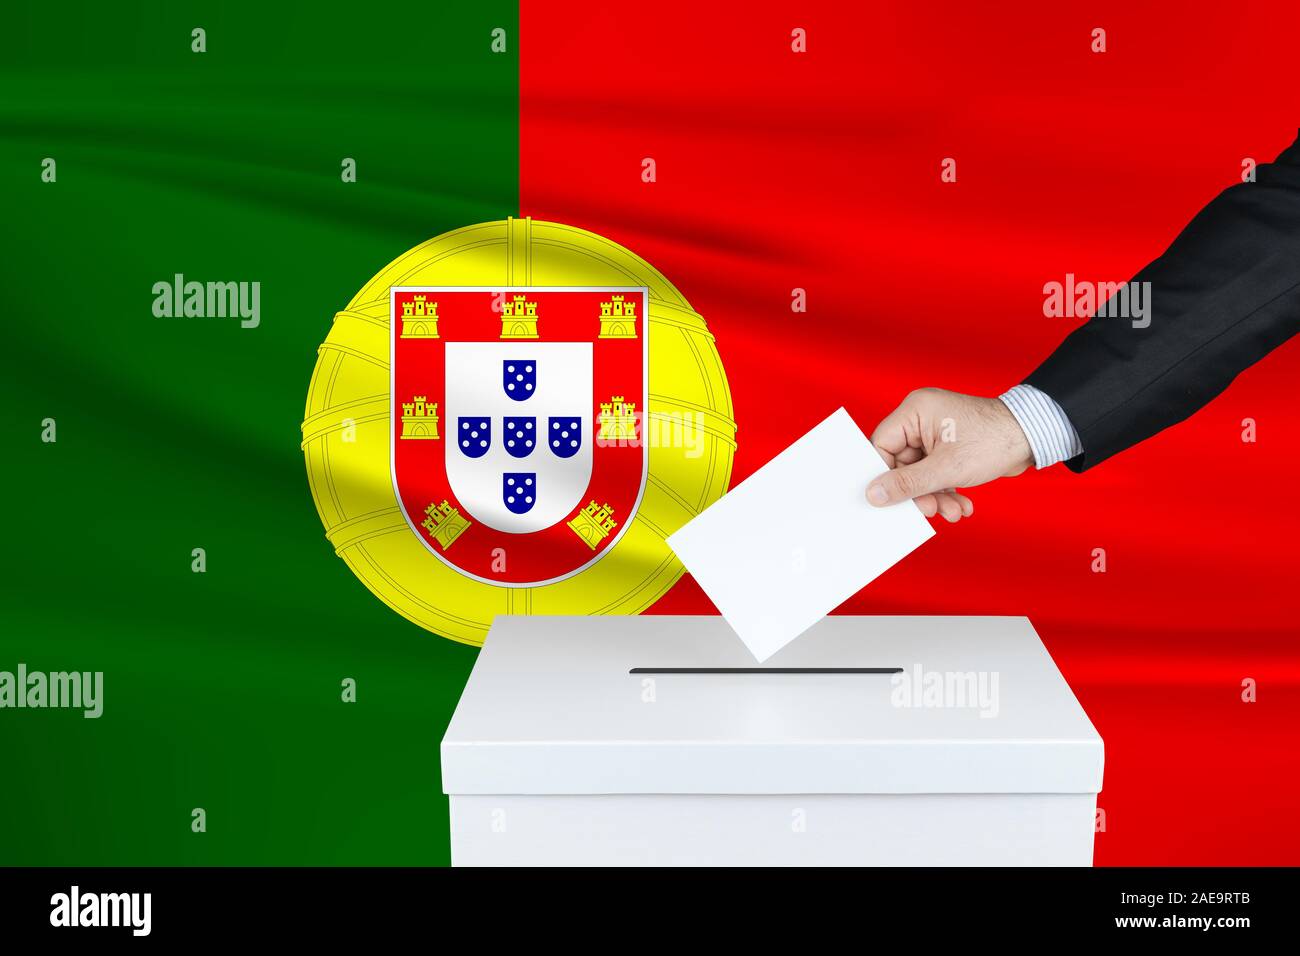 Election in Portugal. The hand of man putting his vote in the ballot box. Waved Portugal flag on background. Stock Photo